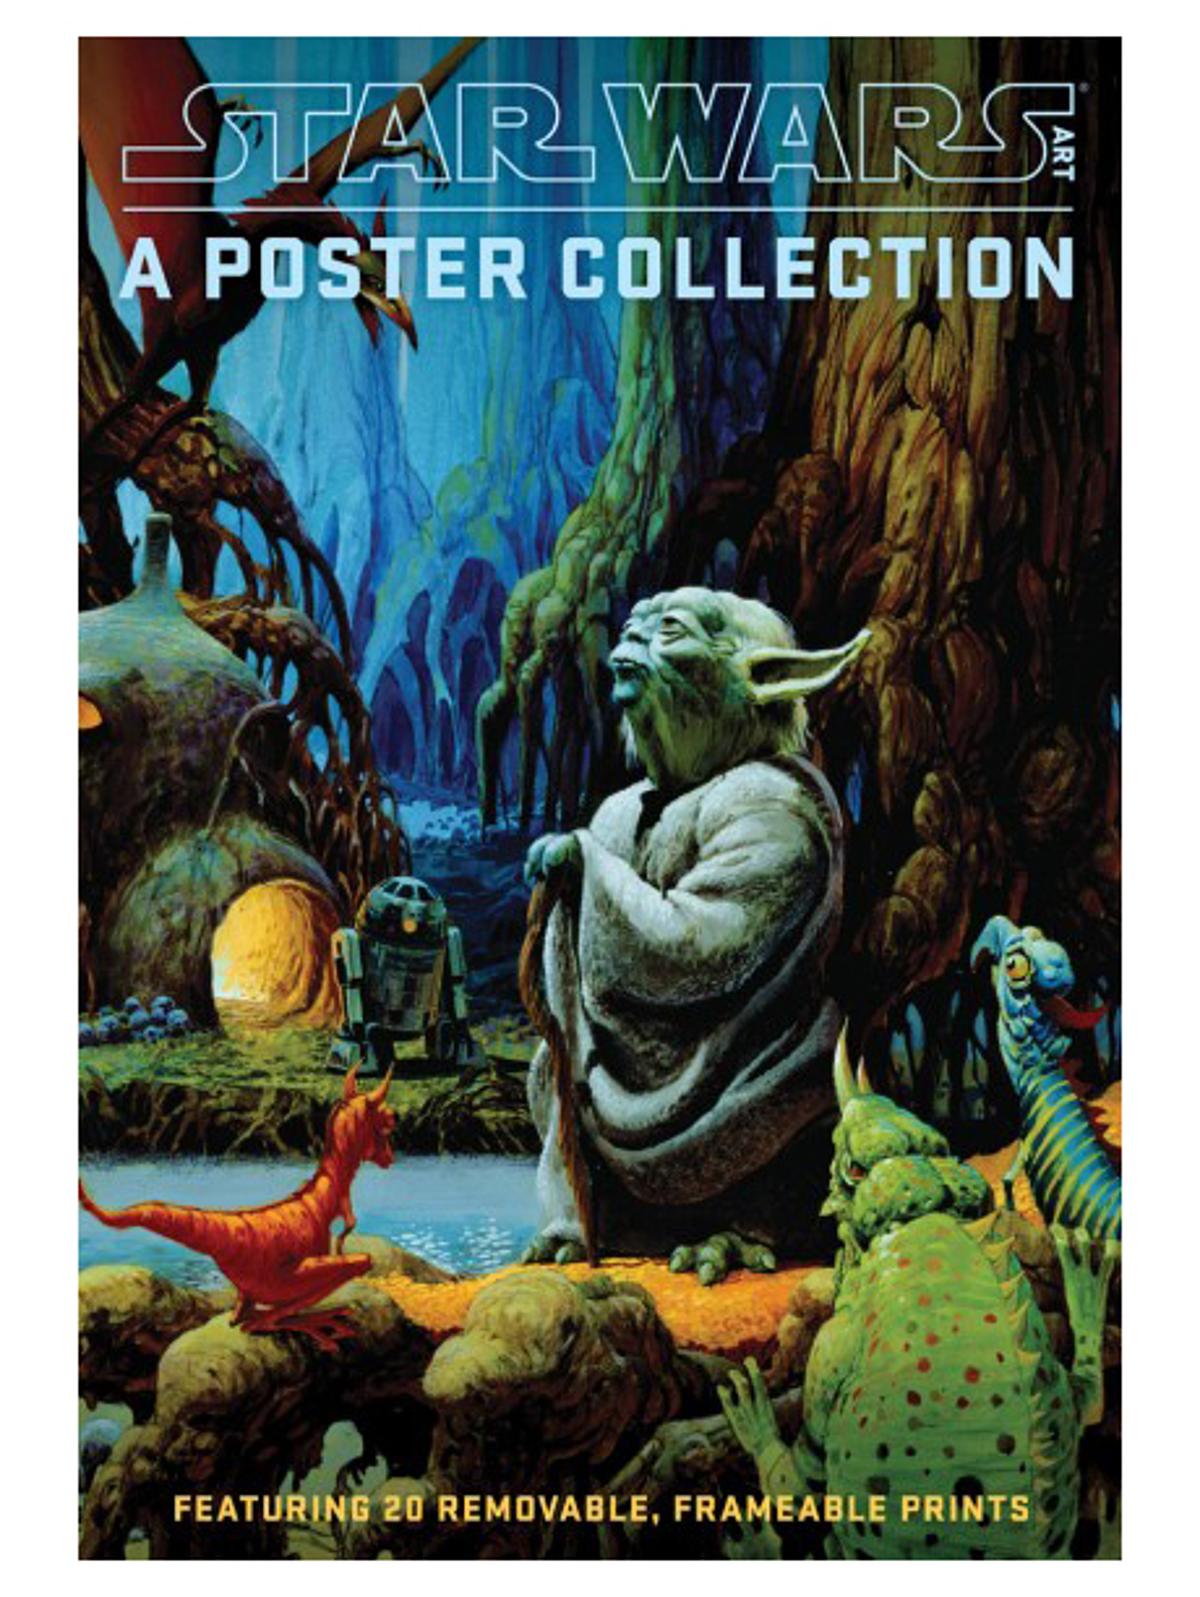 Star Wars Art: A Poster Collection Each